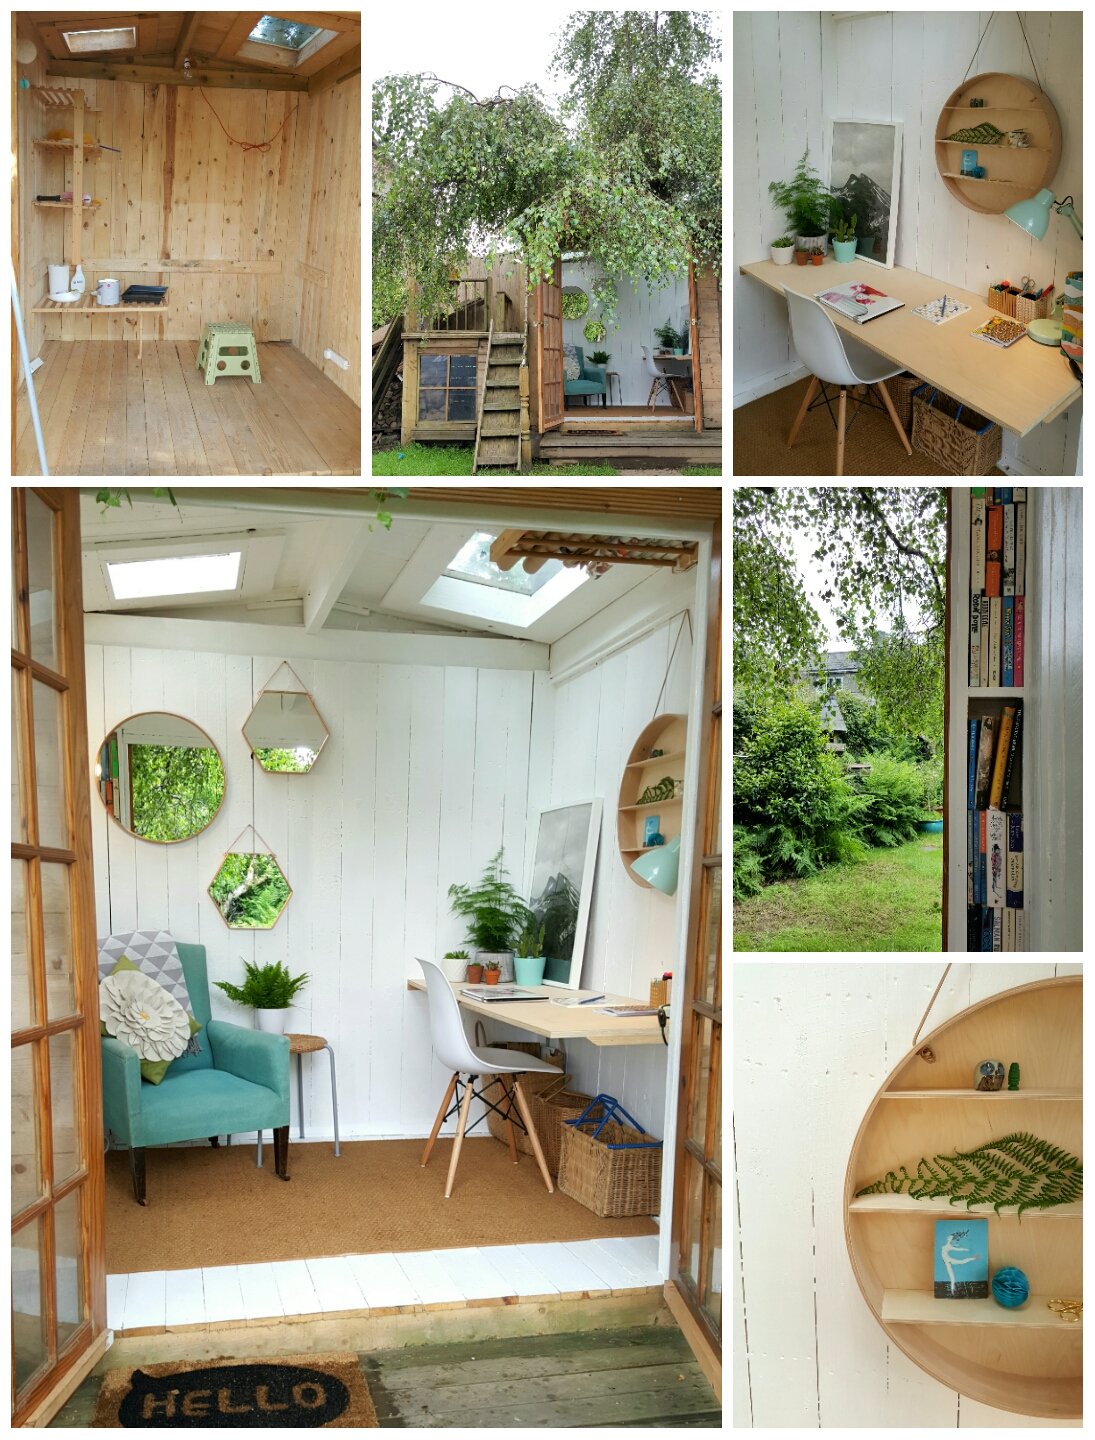 She shed ideas: 37 ways to create a gorgeous garden hideaway – both inside  and out | Gardeningetc